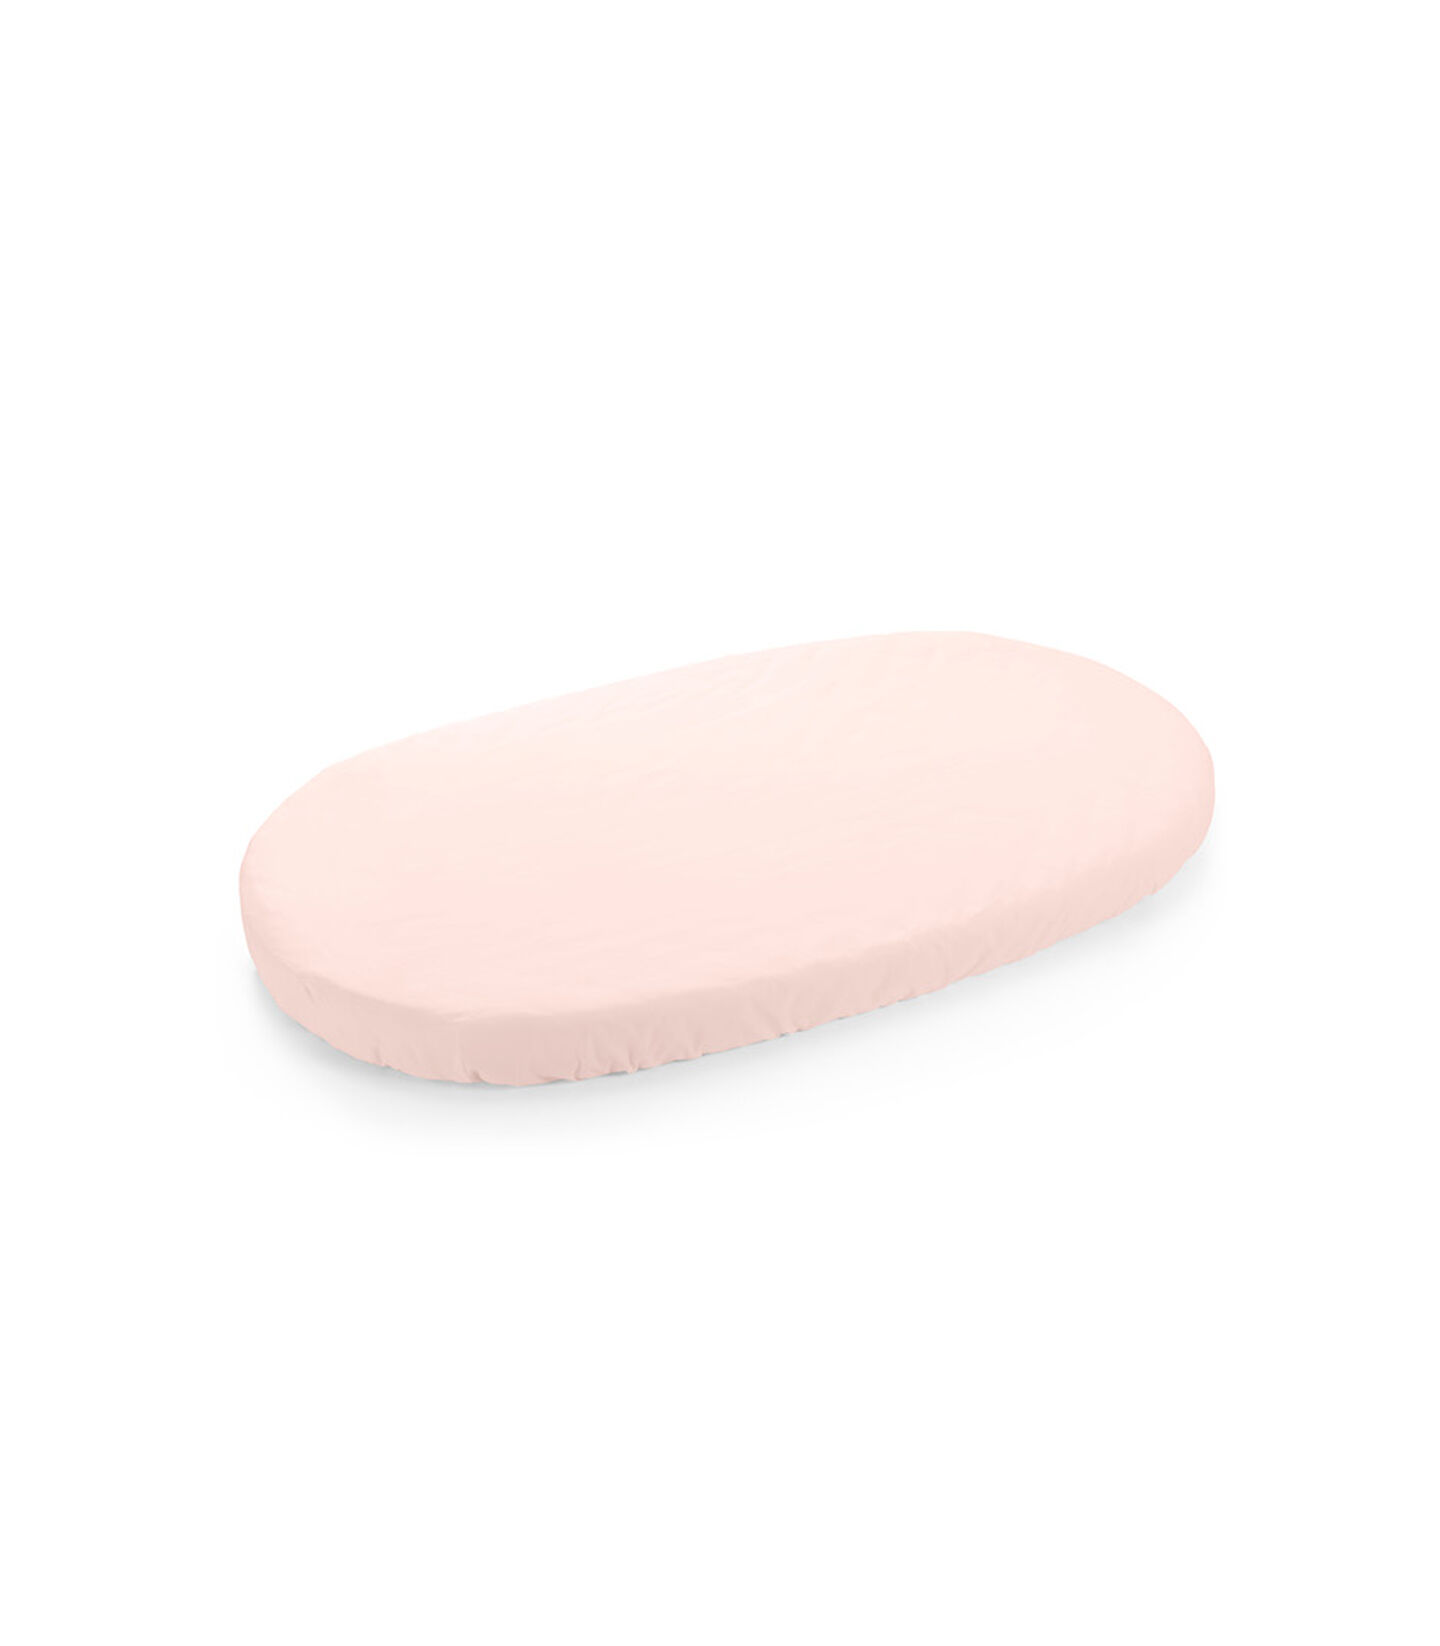 Stokke® Sleepi™ Fitted Sheet Pink, Персиково-розовый, mainview view 1